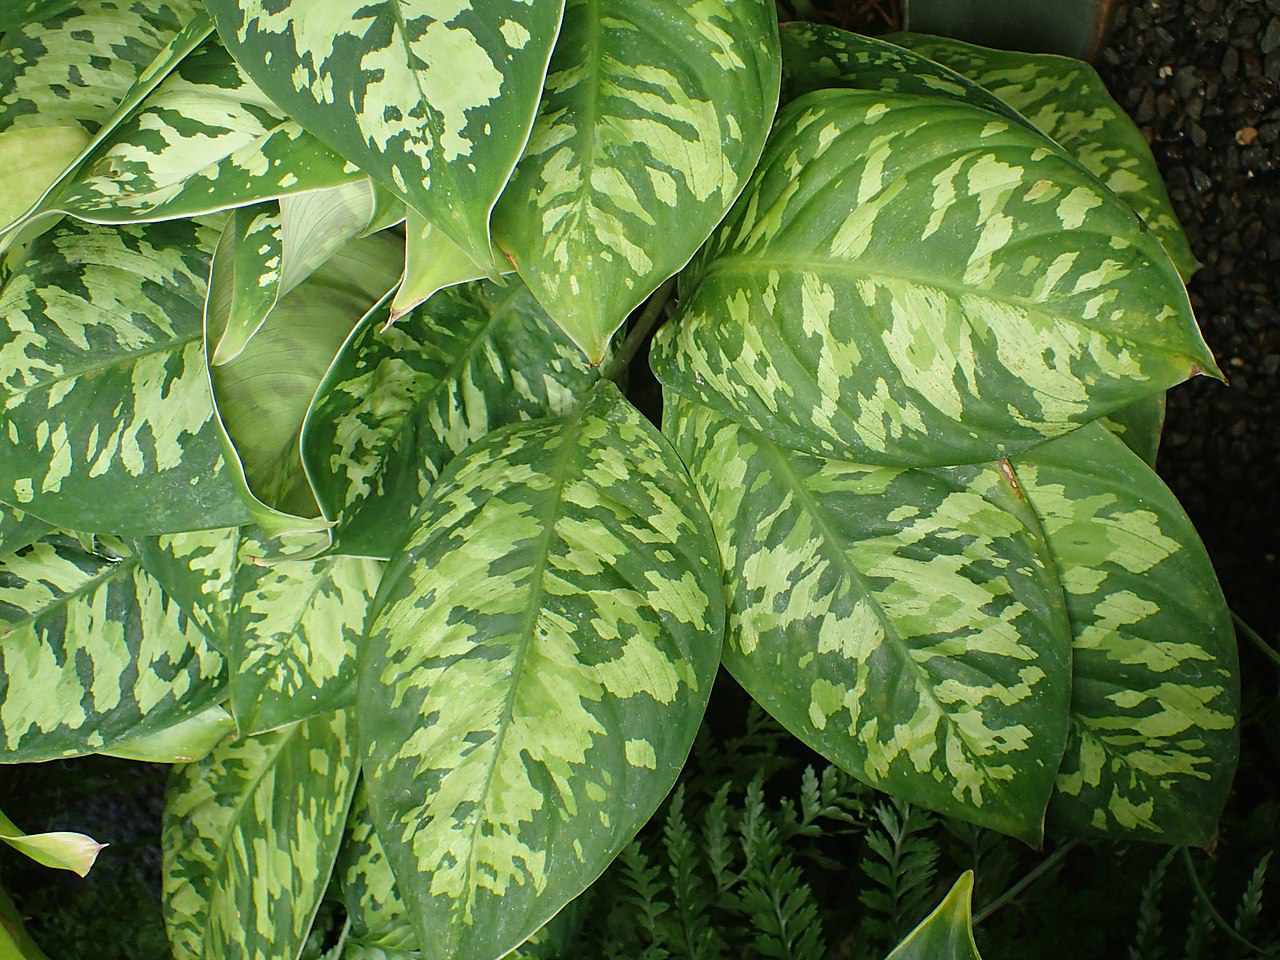 Close up of the variegated leaves of the Homalomena wallisii